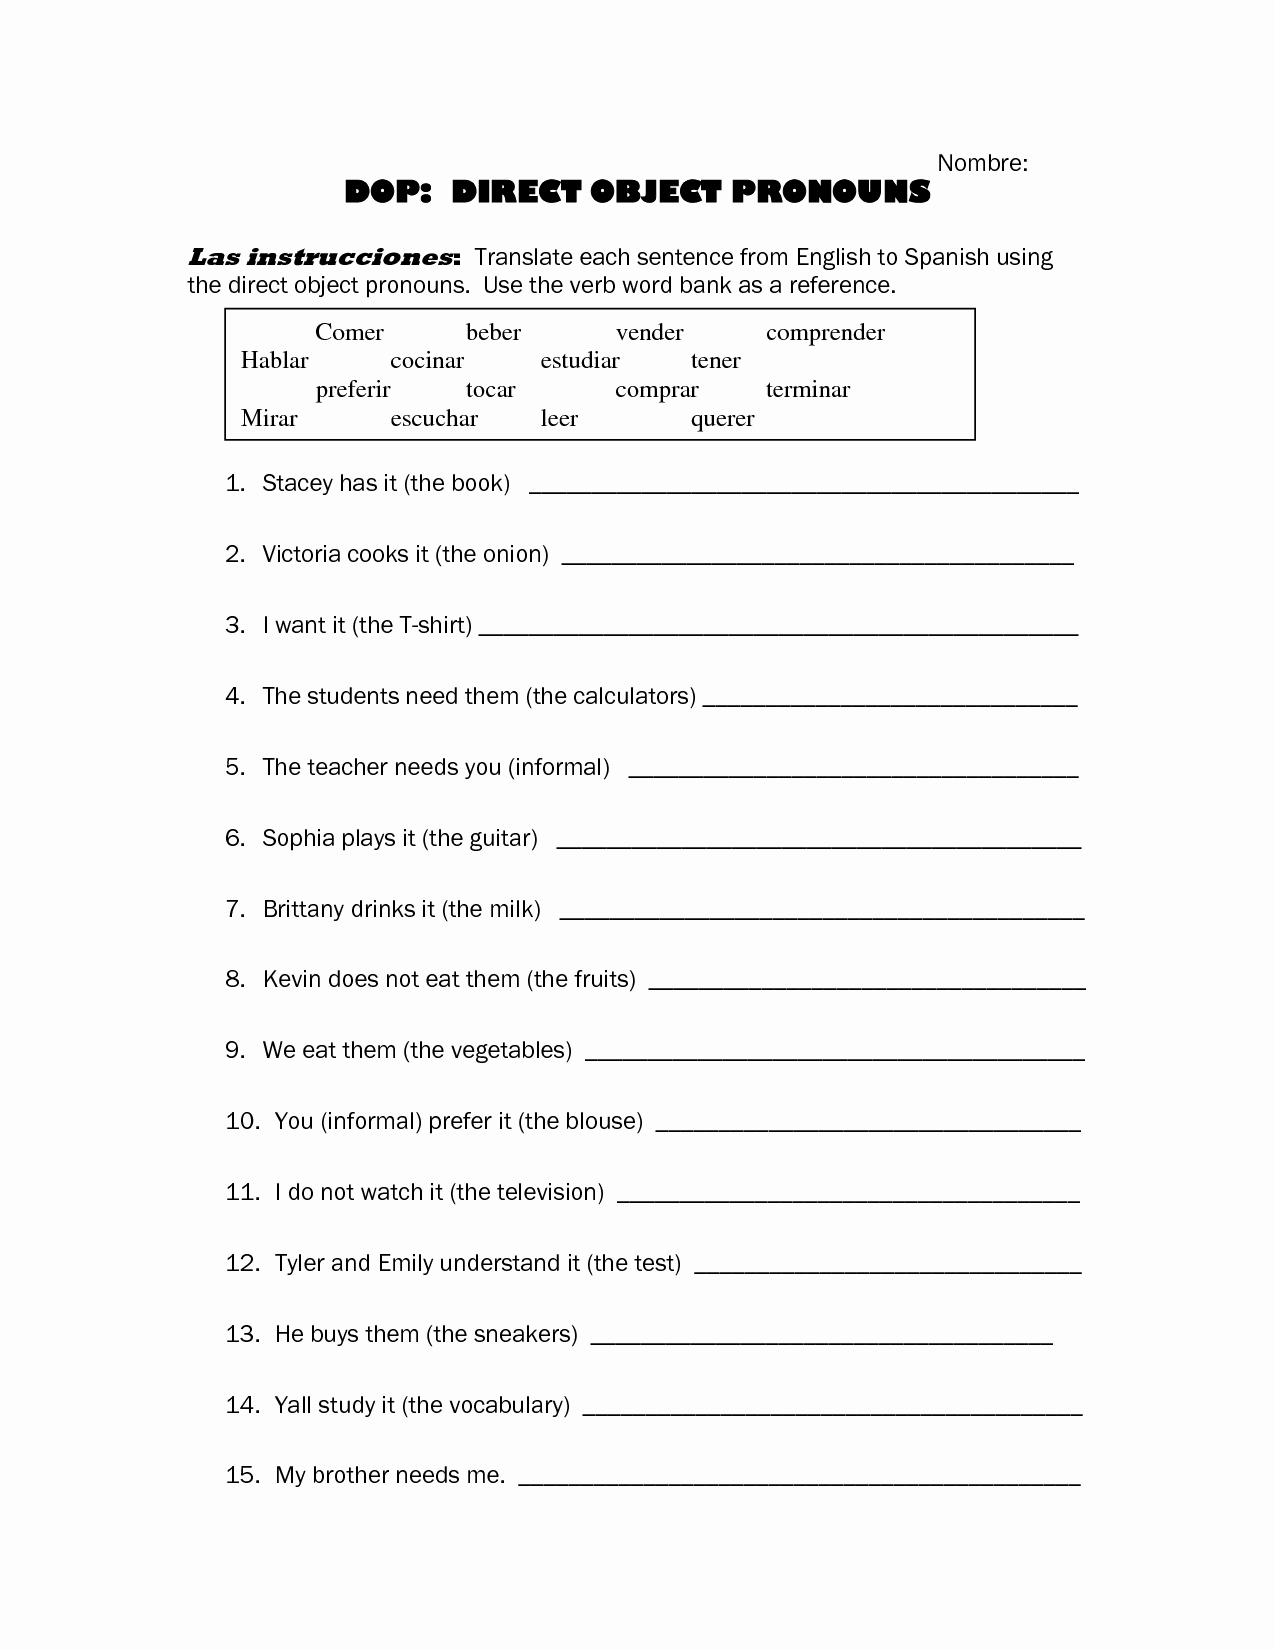 Subject Pronouns In Spanish Worksheet Fresh French Grammar Exercises Direct Indirect Object Pronouns